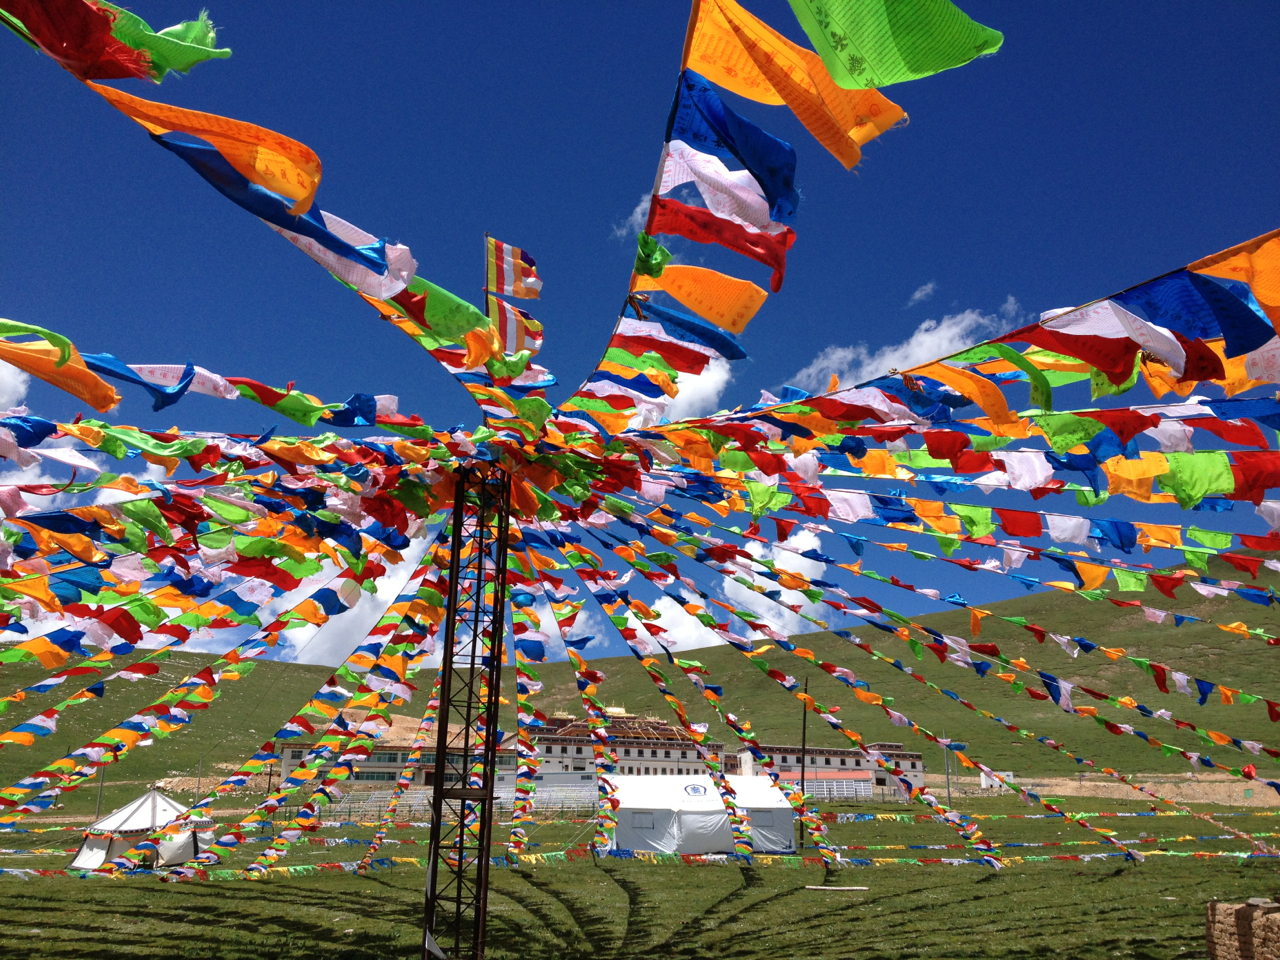 Prayer flags raised to welcome guests to Ayang Gompa, Eastern Tibet